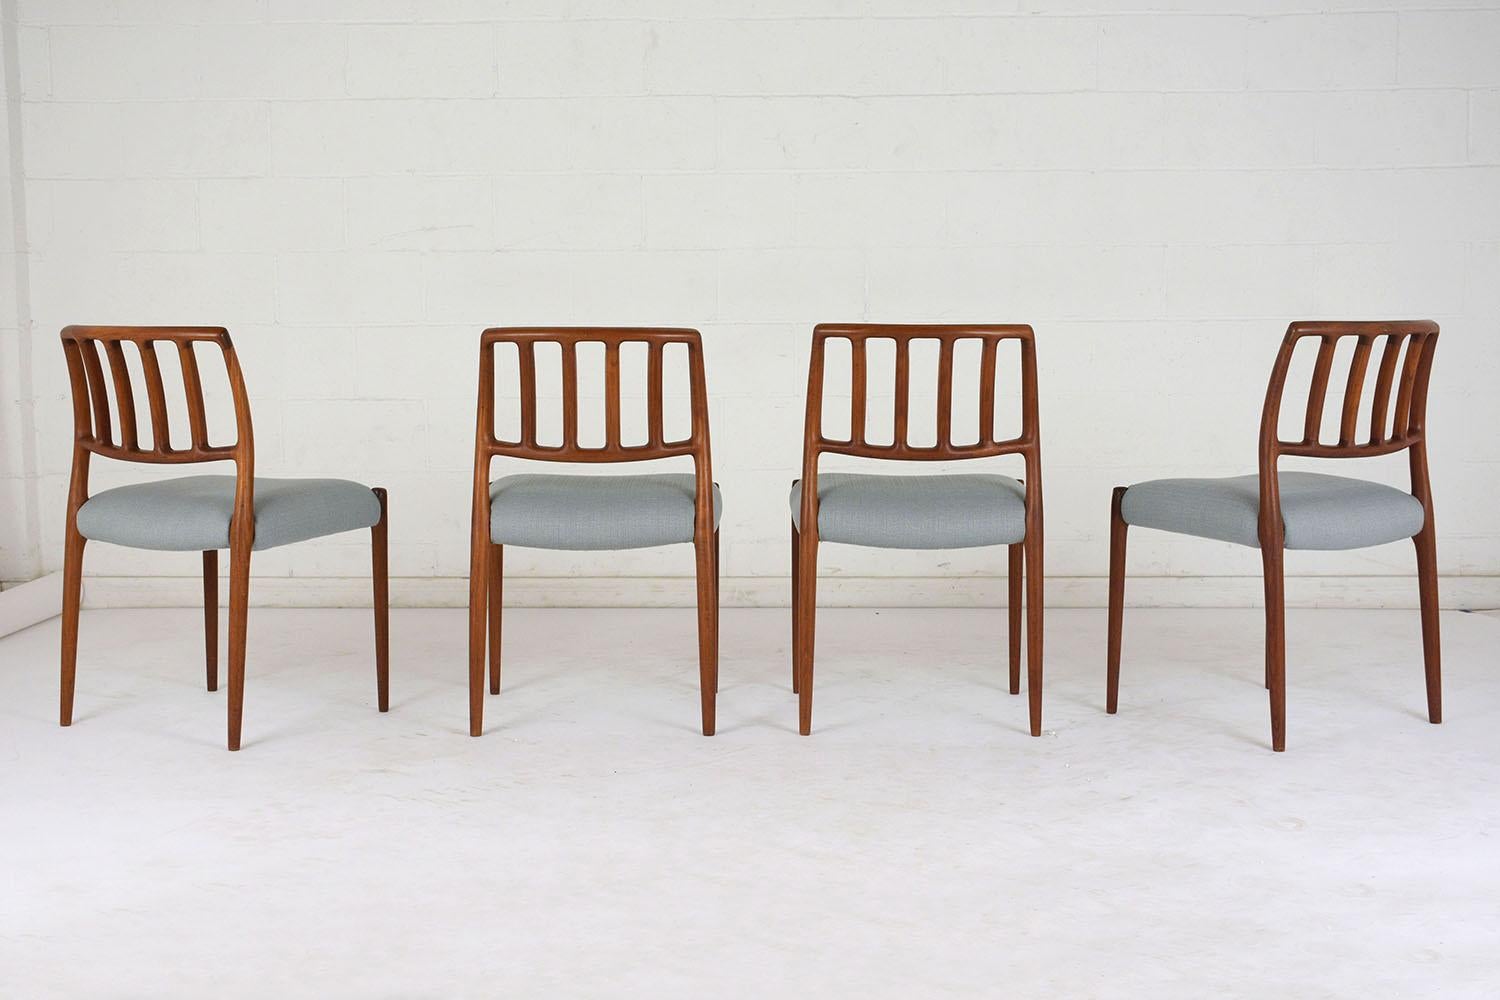 This set of six 1960s Mid-Century Modern dining room chairs is model 83 by Niels Otto Moller. The teak wood frames have a curved back with slatted accents and the original finish. The comfortable seats have been completely restored with new cushions